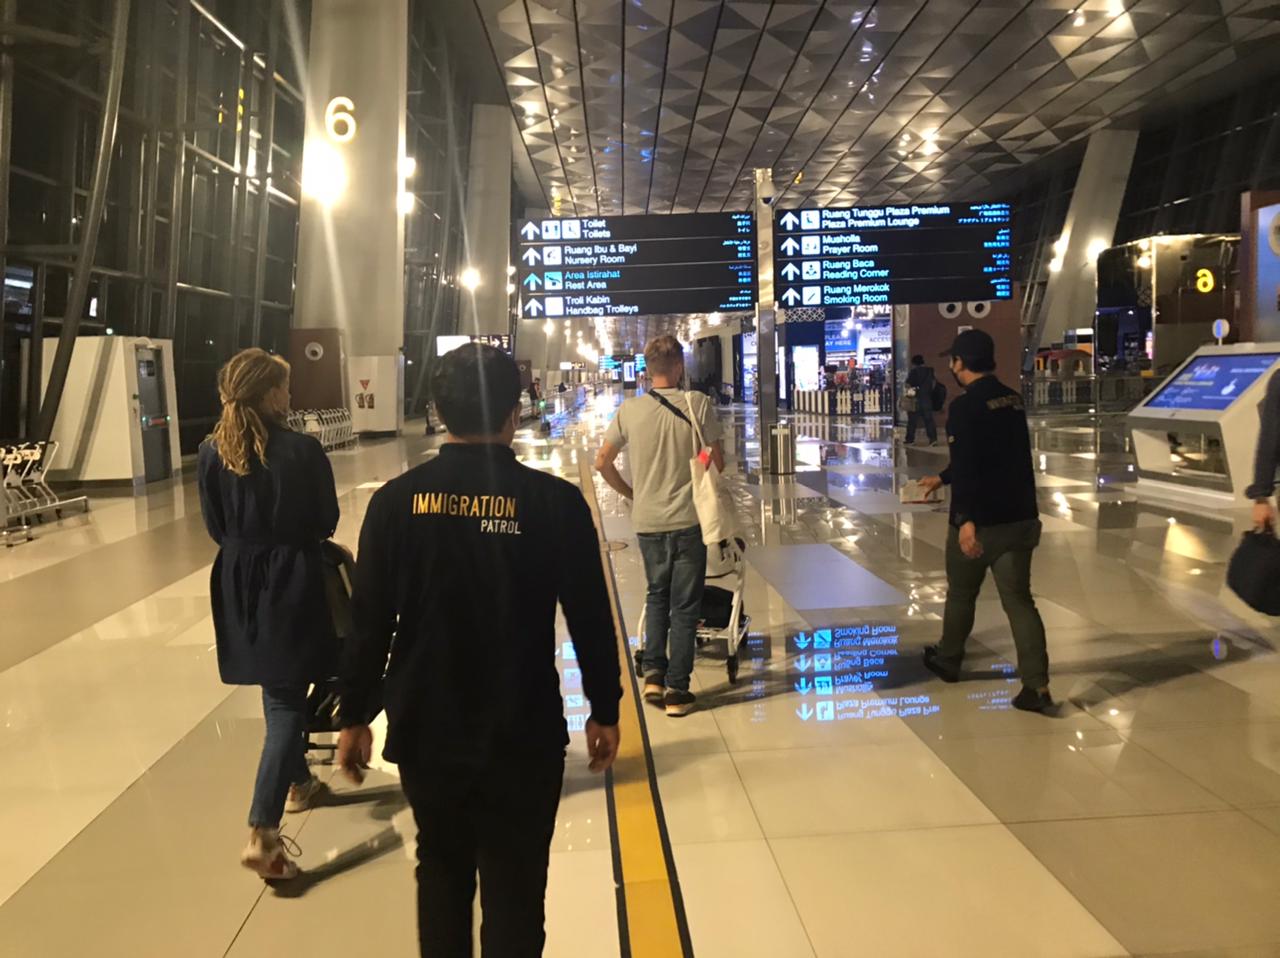 The deported foreigners at Soekarno-Hatta International Airport as they were escorted by immigration authorities last night. Photo: Bali office for the Ministry of Law and Human Rights